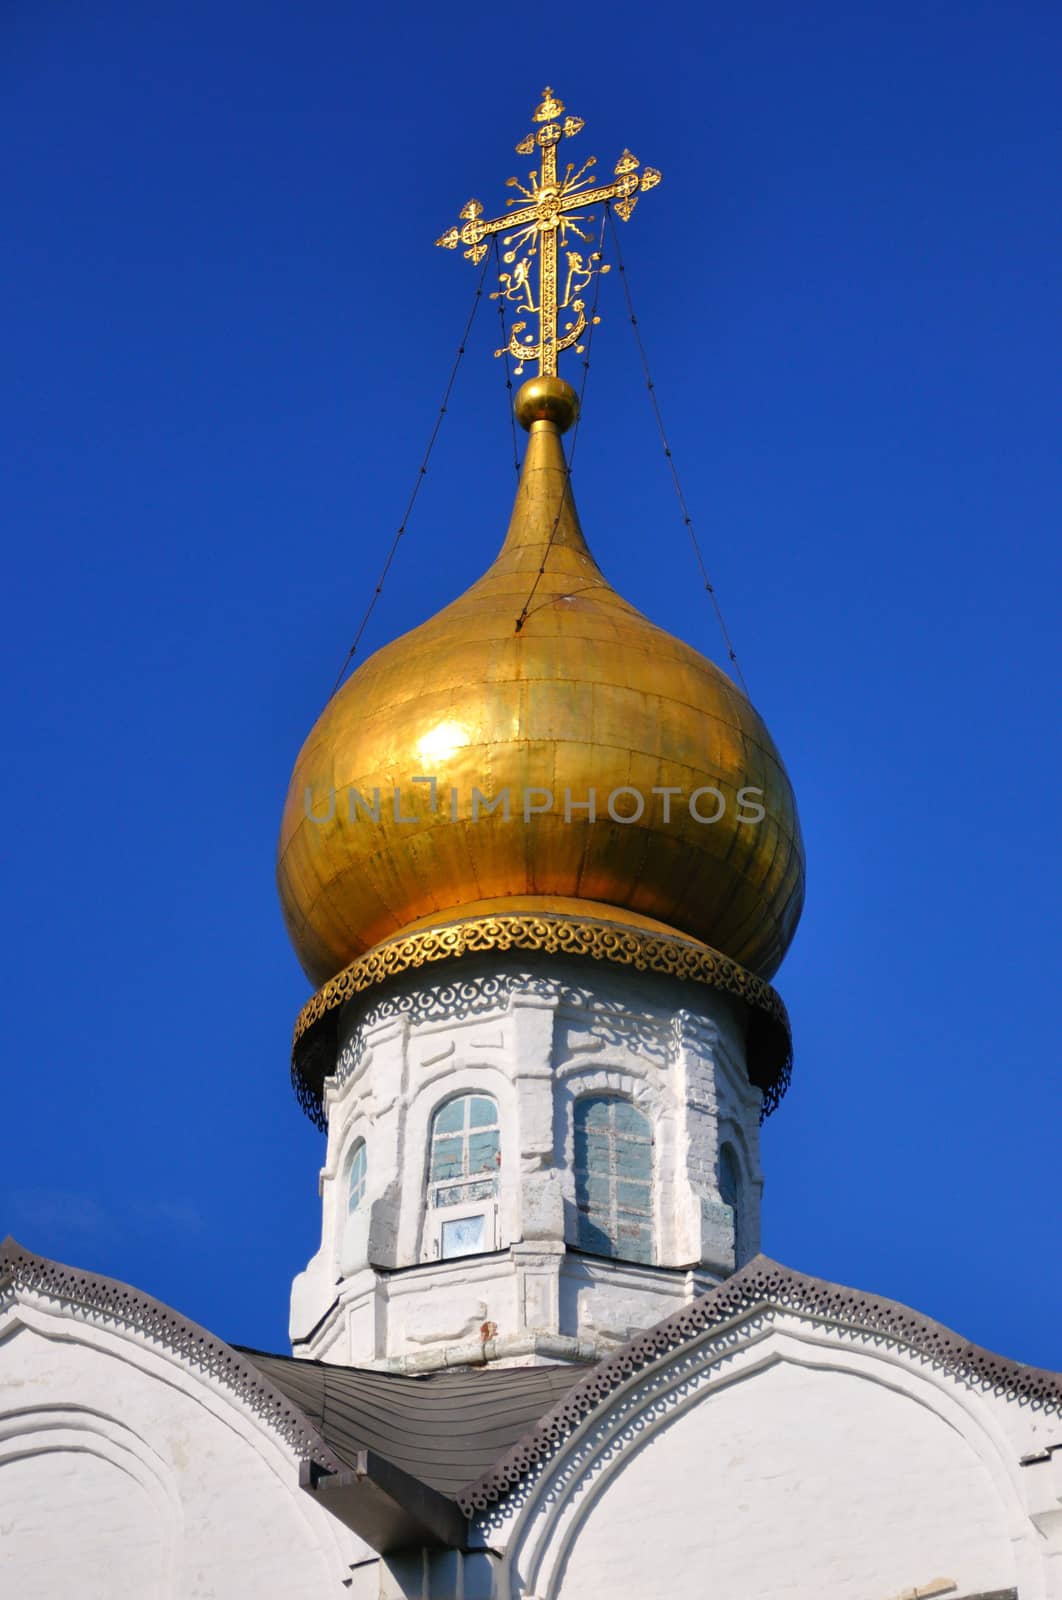 White orthodox church with a golden dome, Sergiev Posad, Moscow region, Russia